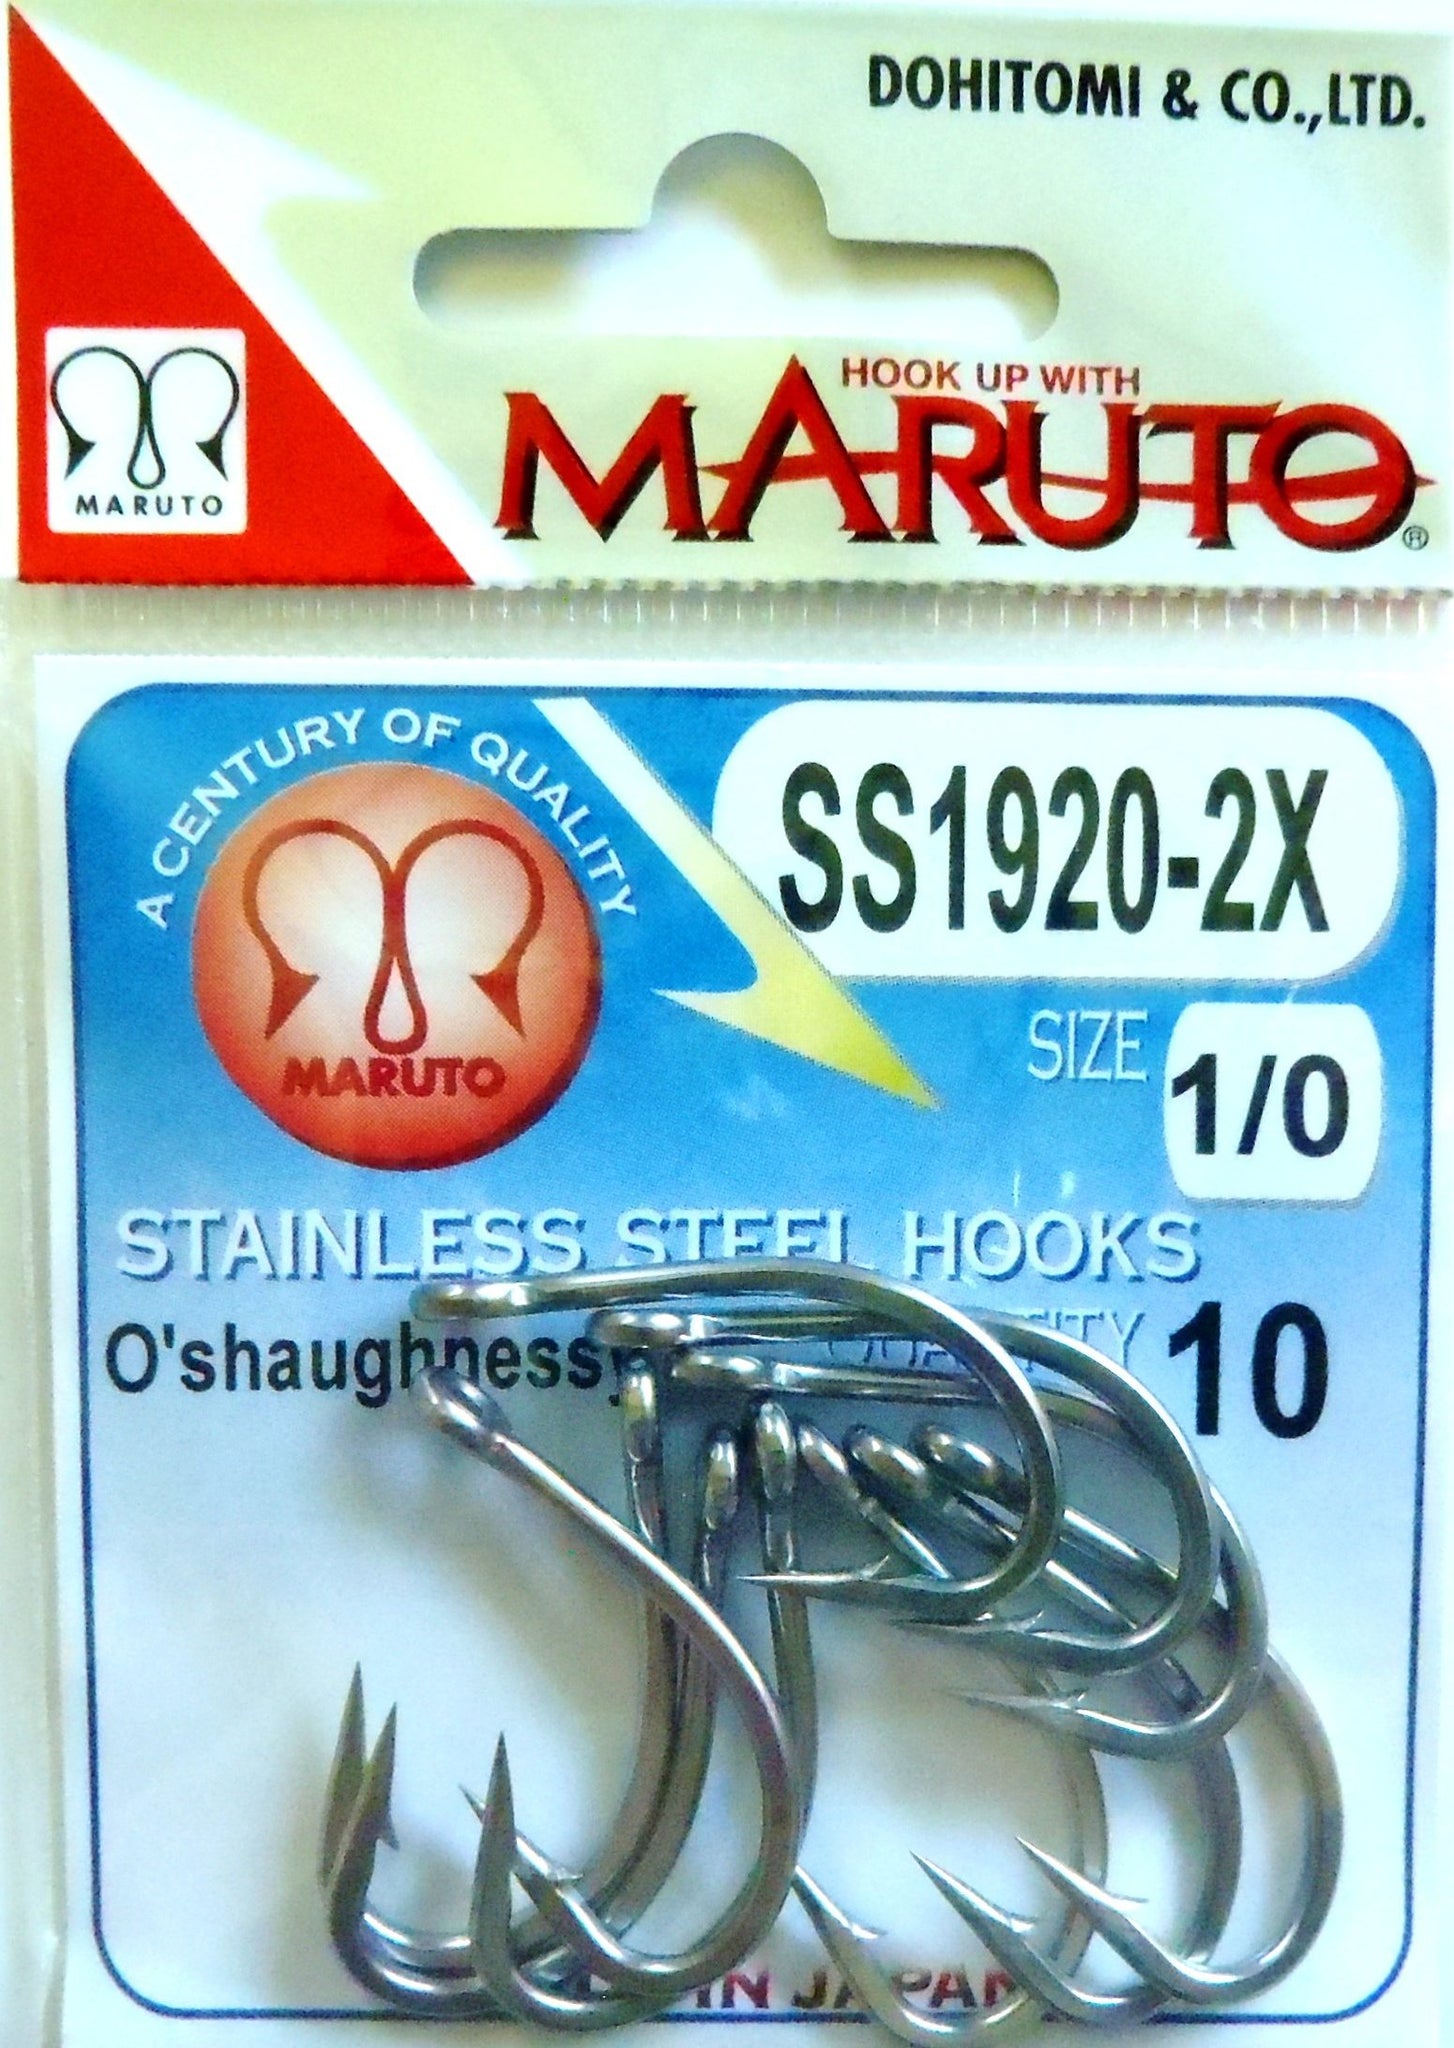 1920-2X Stainless Steel Hook by Maruto Size 2 10 Pack